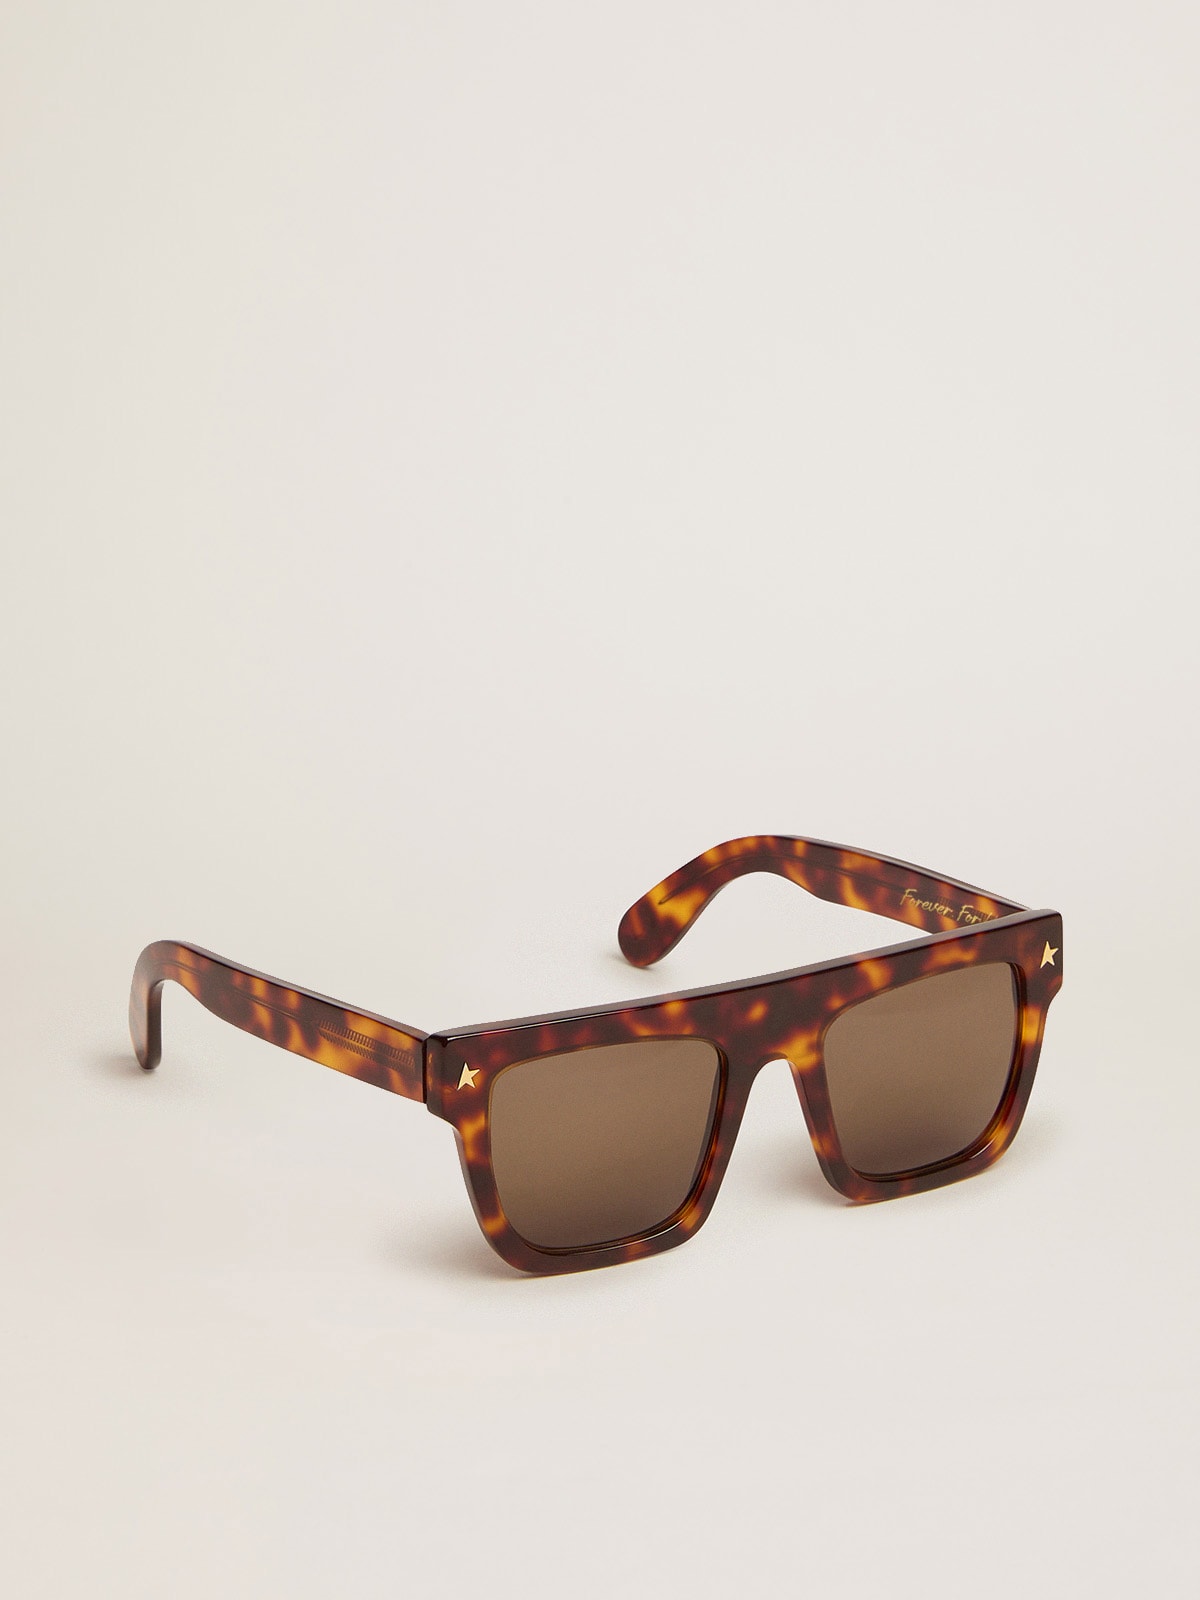 Golden Goose - Square model sunglasses with havana frame and gold details in 